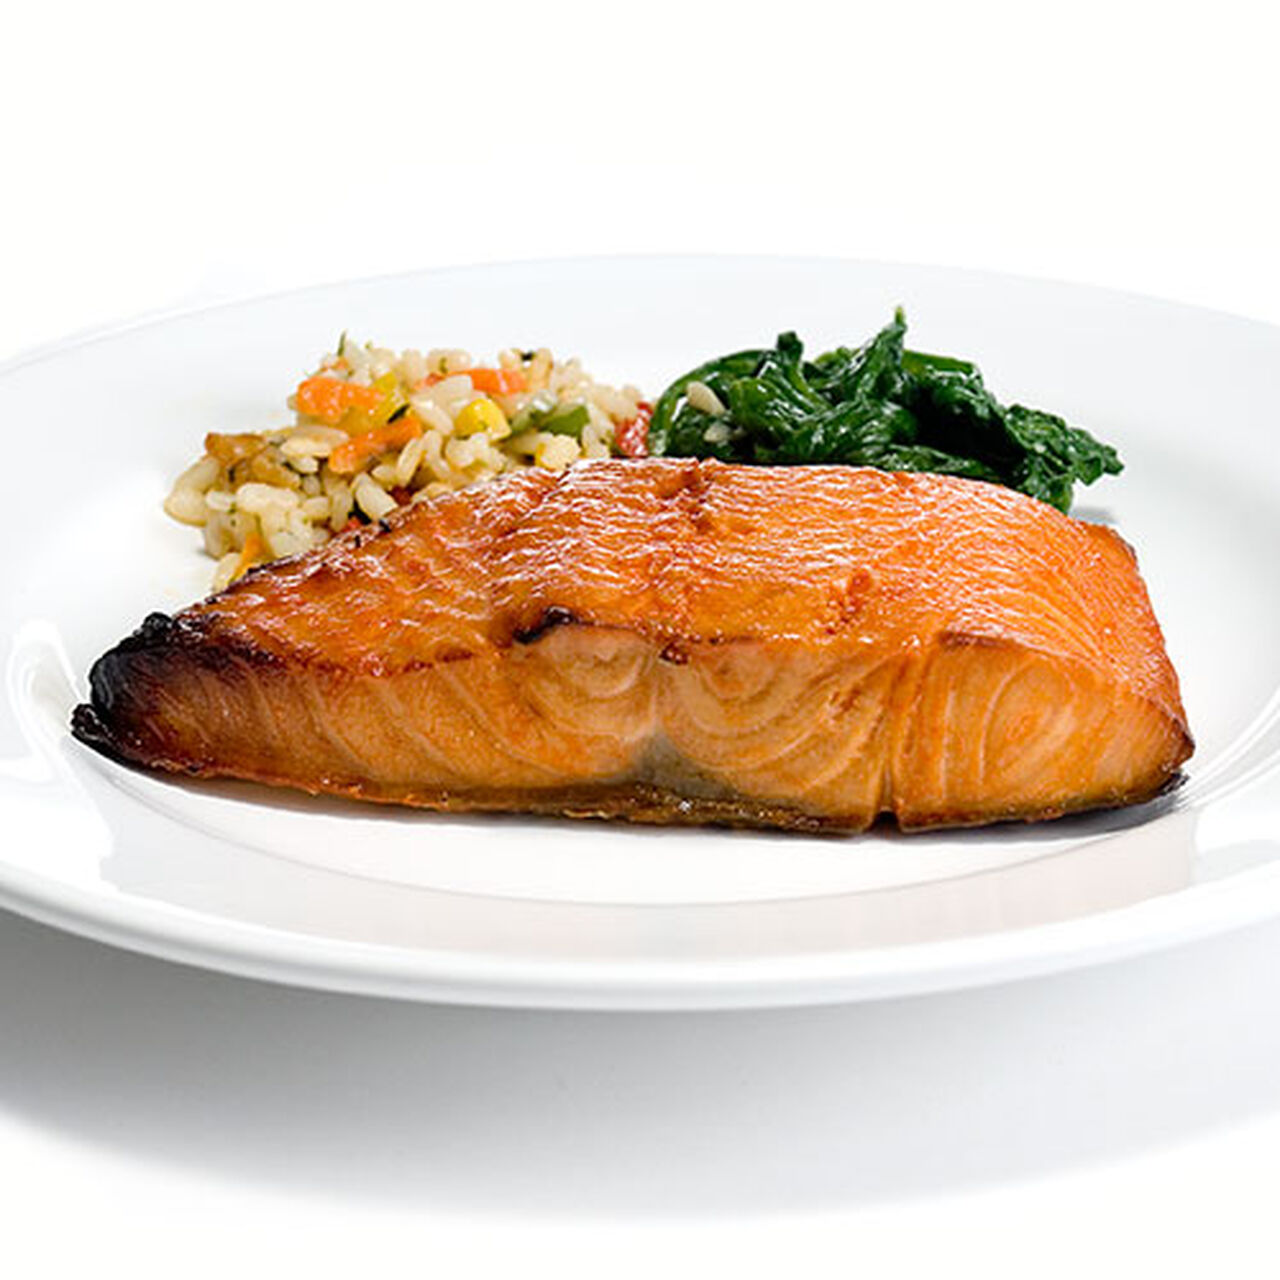 Honey Broiled Salmon by Zabar's - min. wt. 8oz, , large image number 0